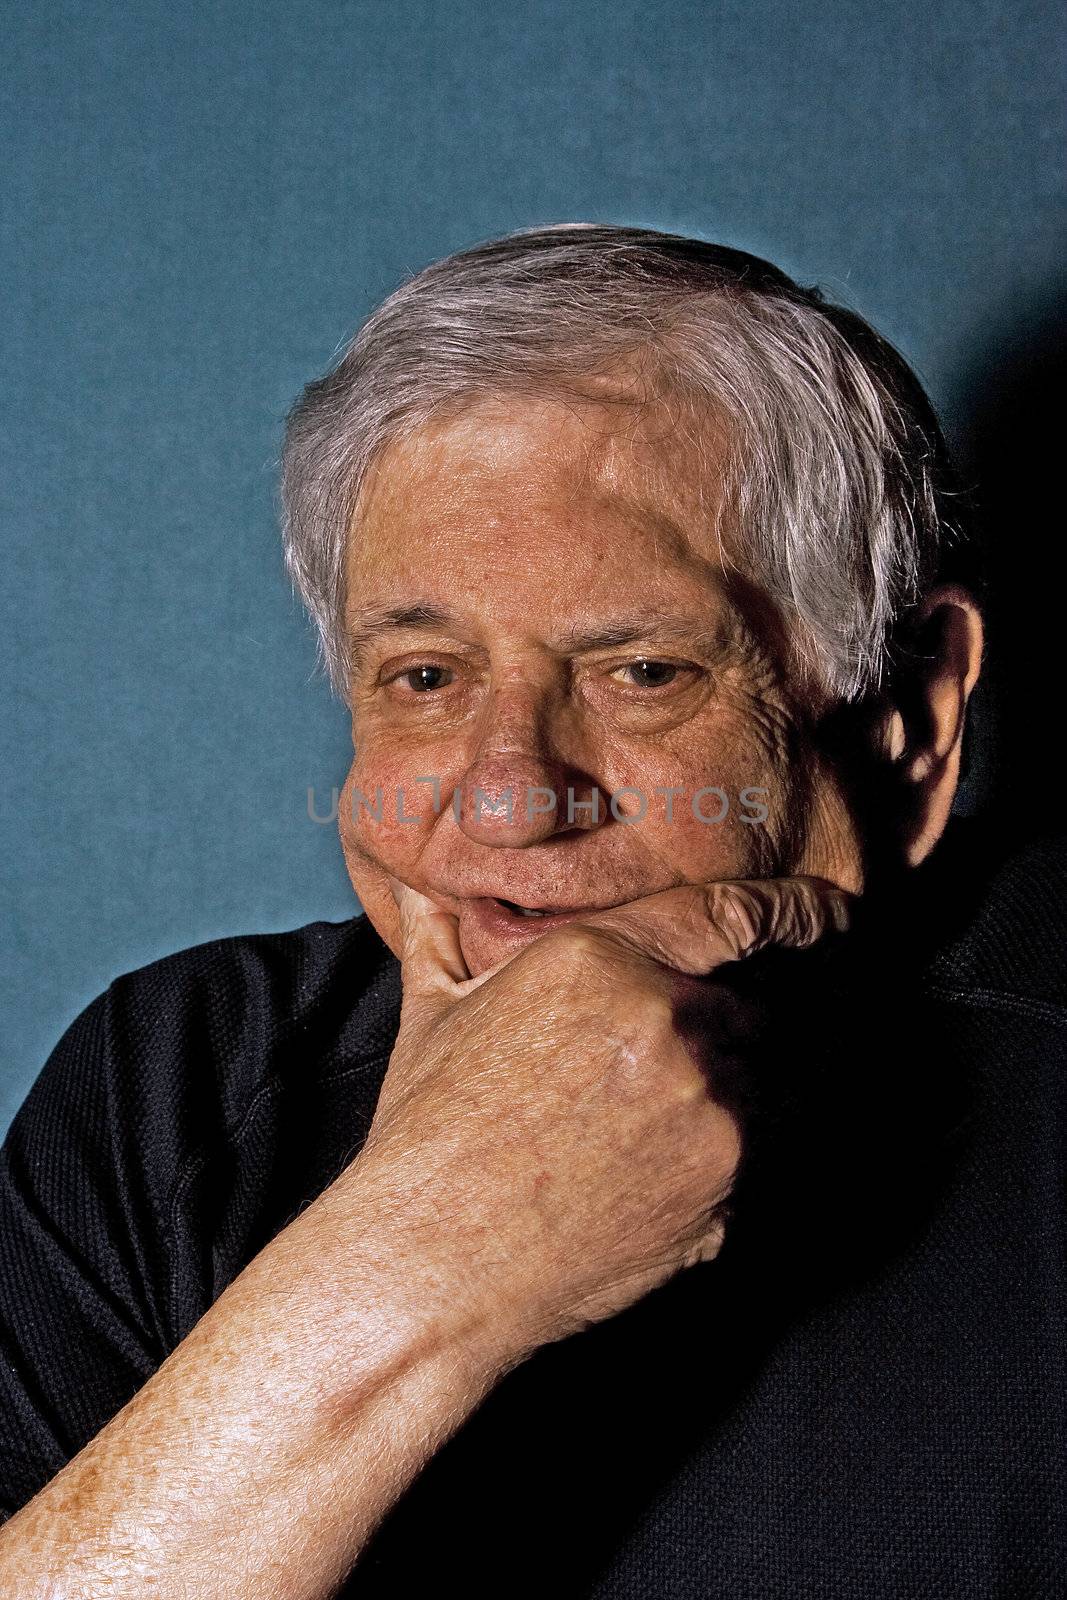 Dramatic portrait of a senior man with his hand on the side of his face wearing a black shirt isolated on gray/blue